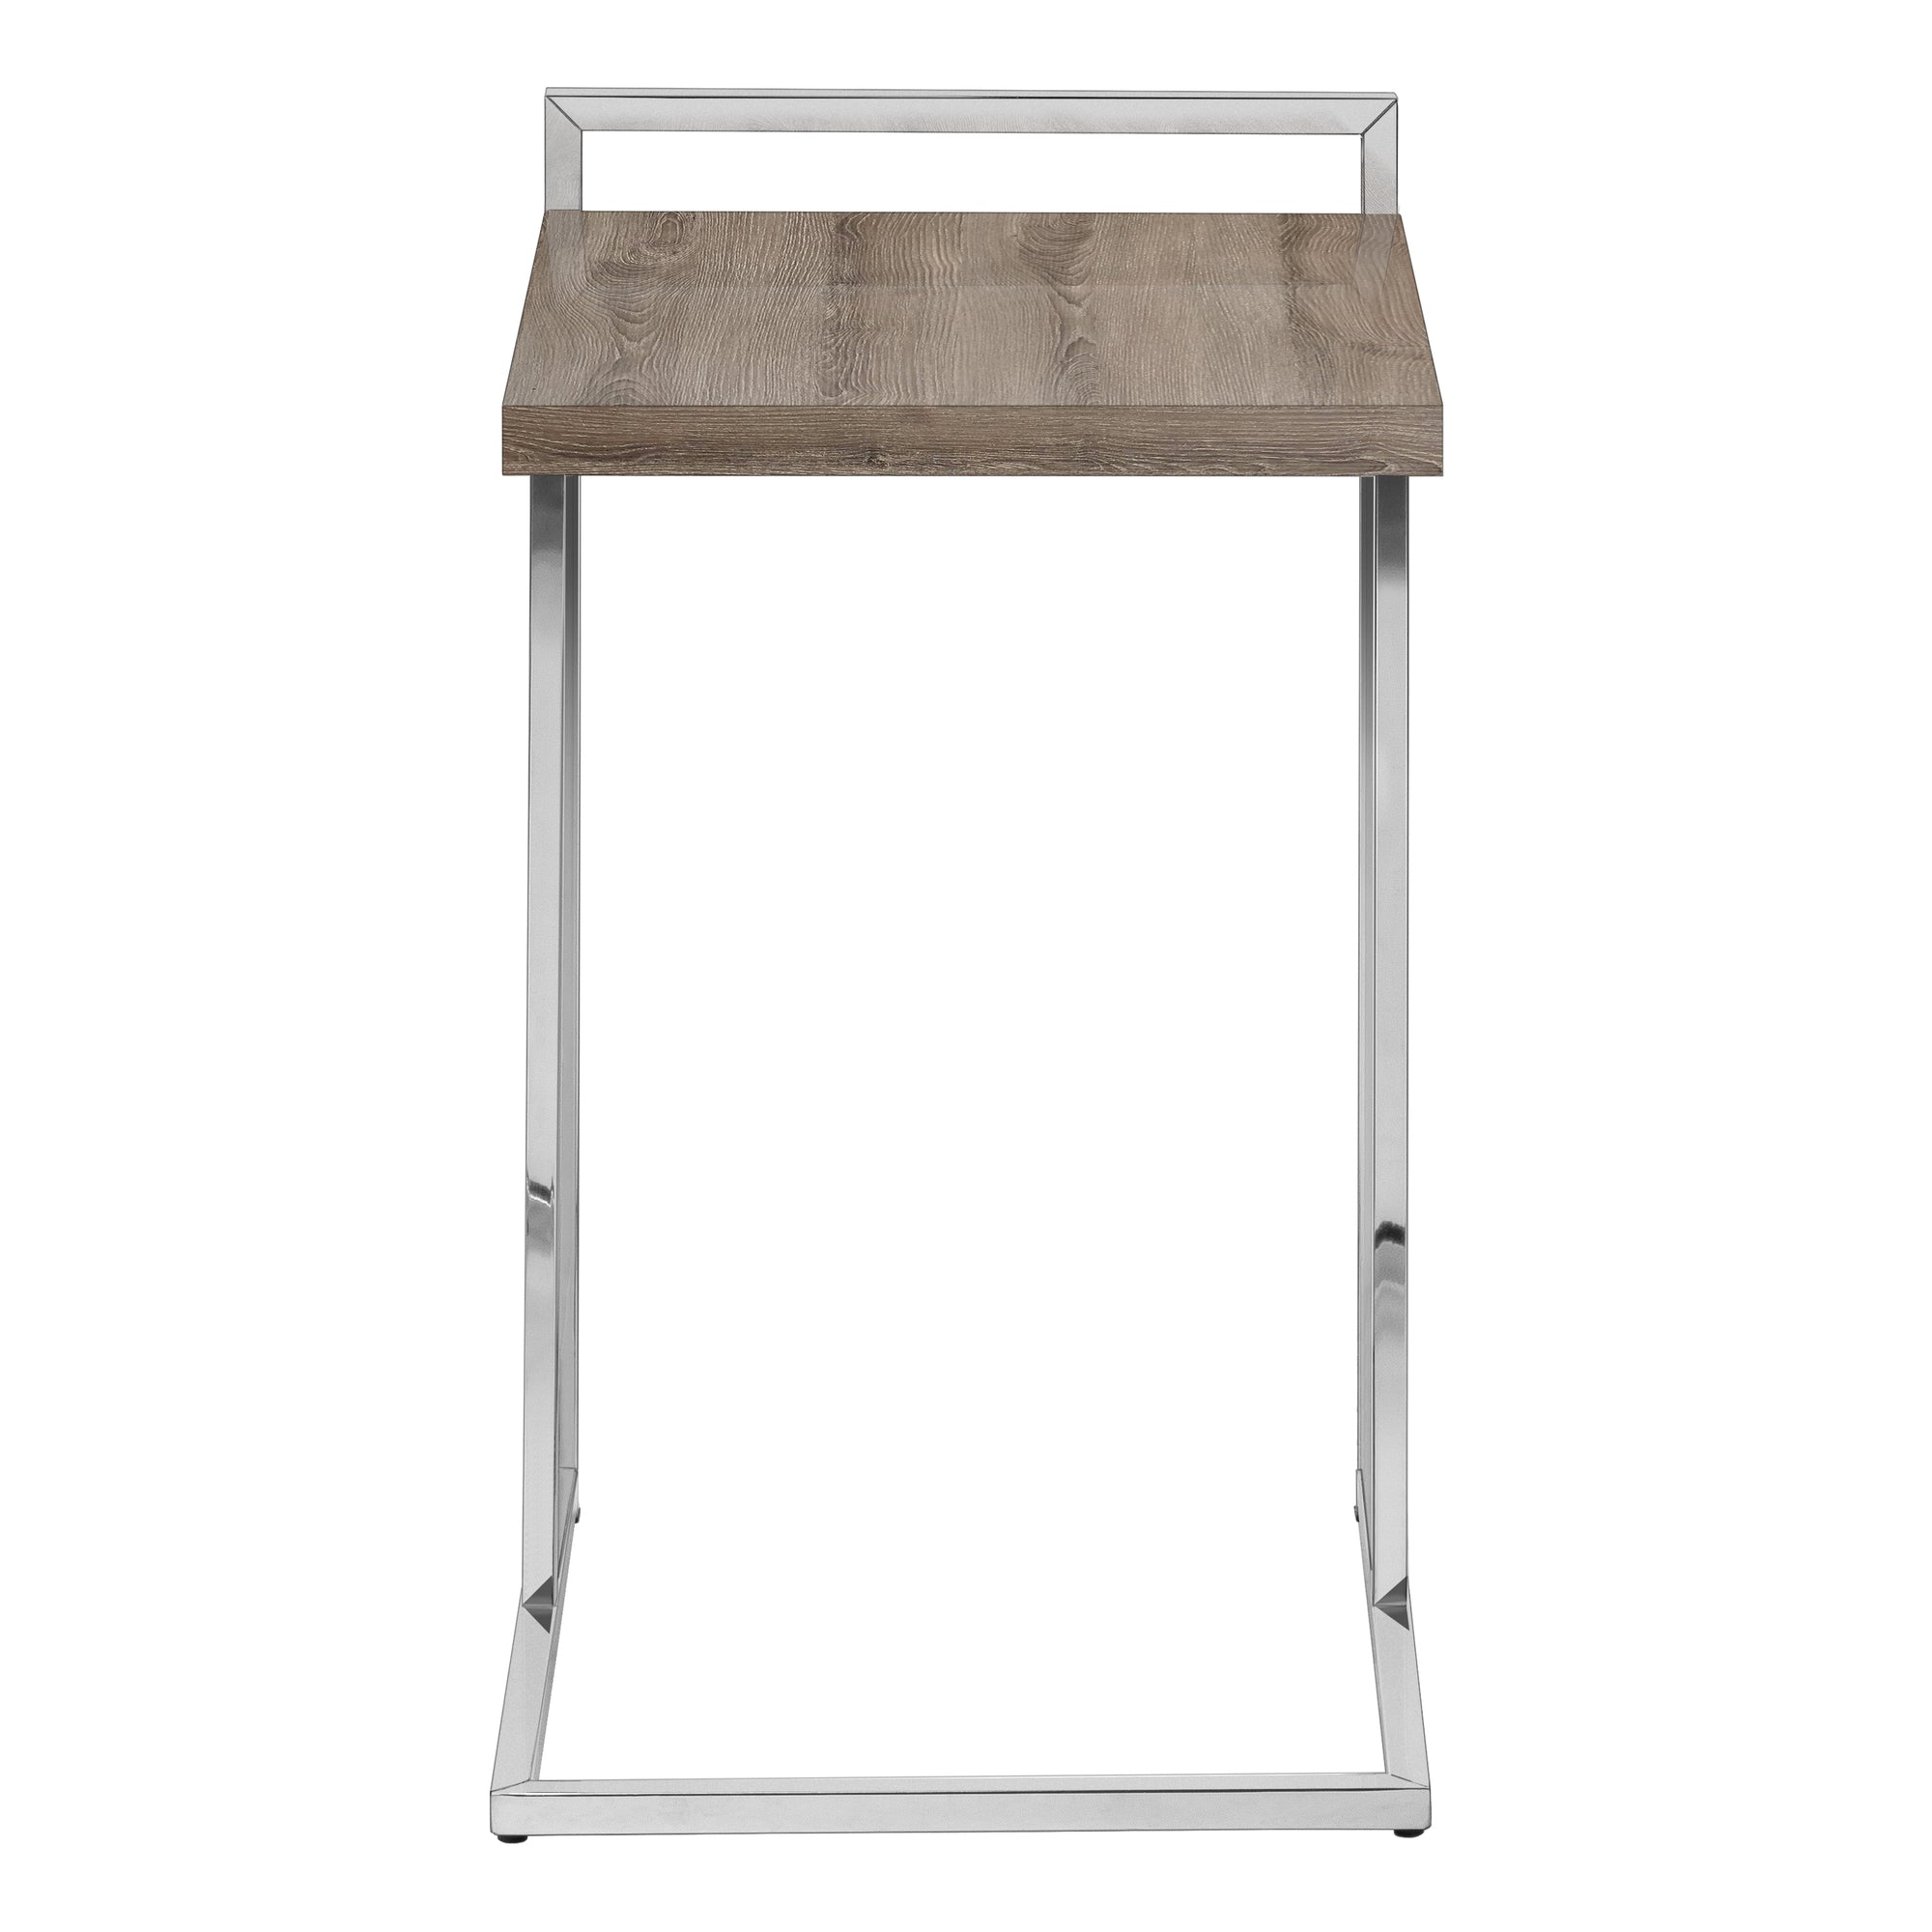 MN-873638    Accent Table, C-Shaped, End, Side, Snack, Living Room, Bedroom, Metal Frame, Laminate, Dark Taupe, Chrome, Contemporary, Modern